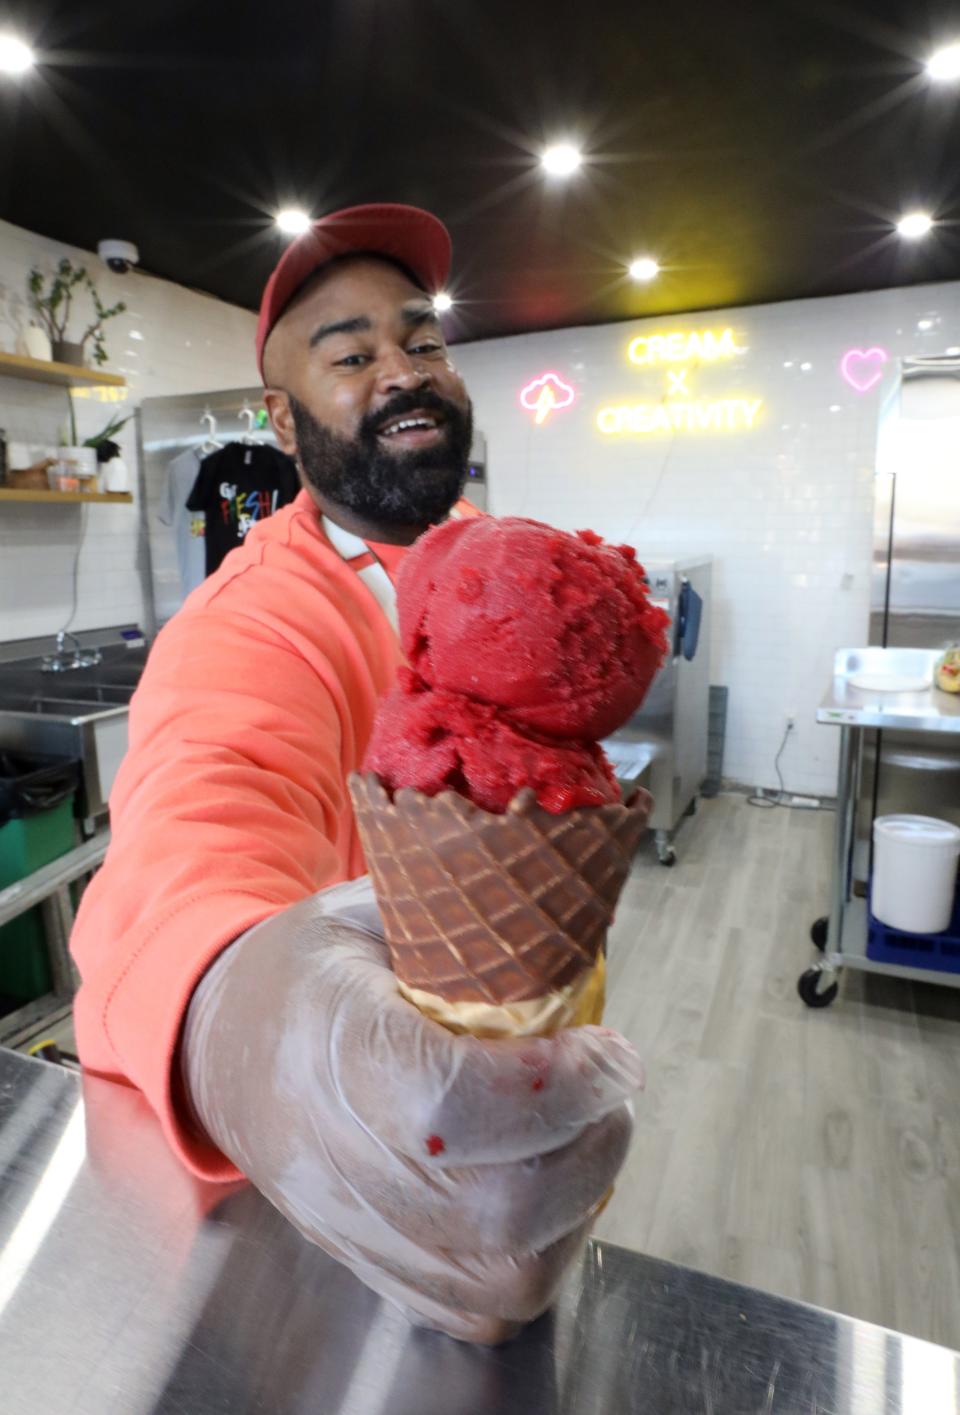 Patrick Cruz with a raspberry sorbet cone at Lost Borough Ice Cream in Yonkers Nov. 10, 2021.